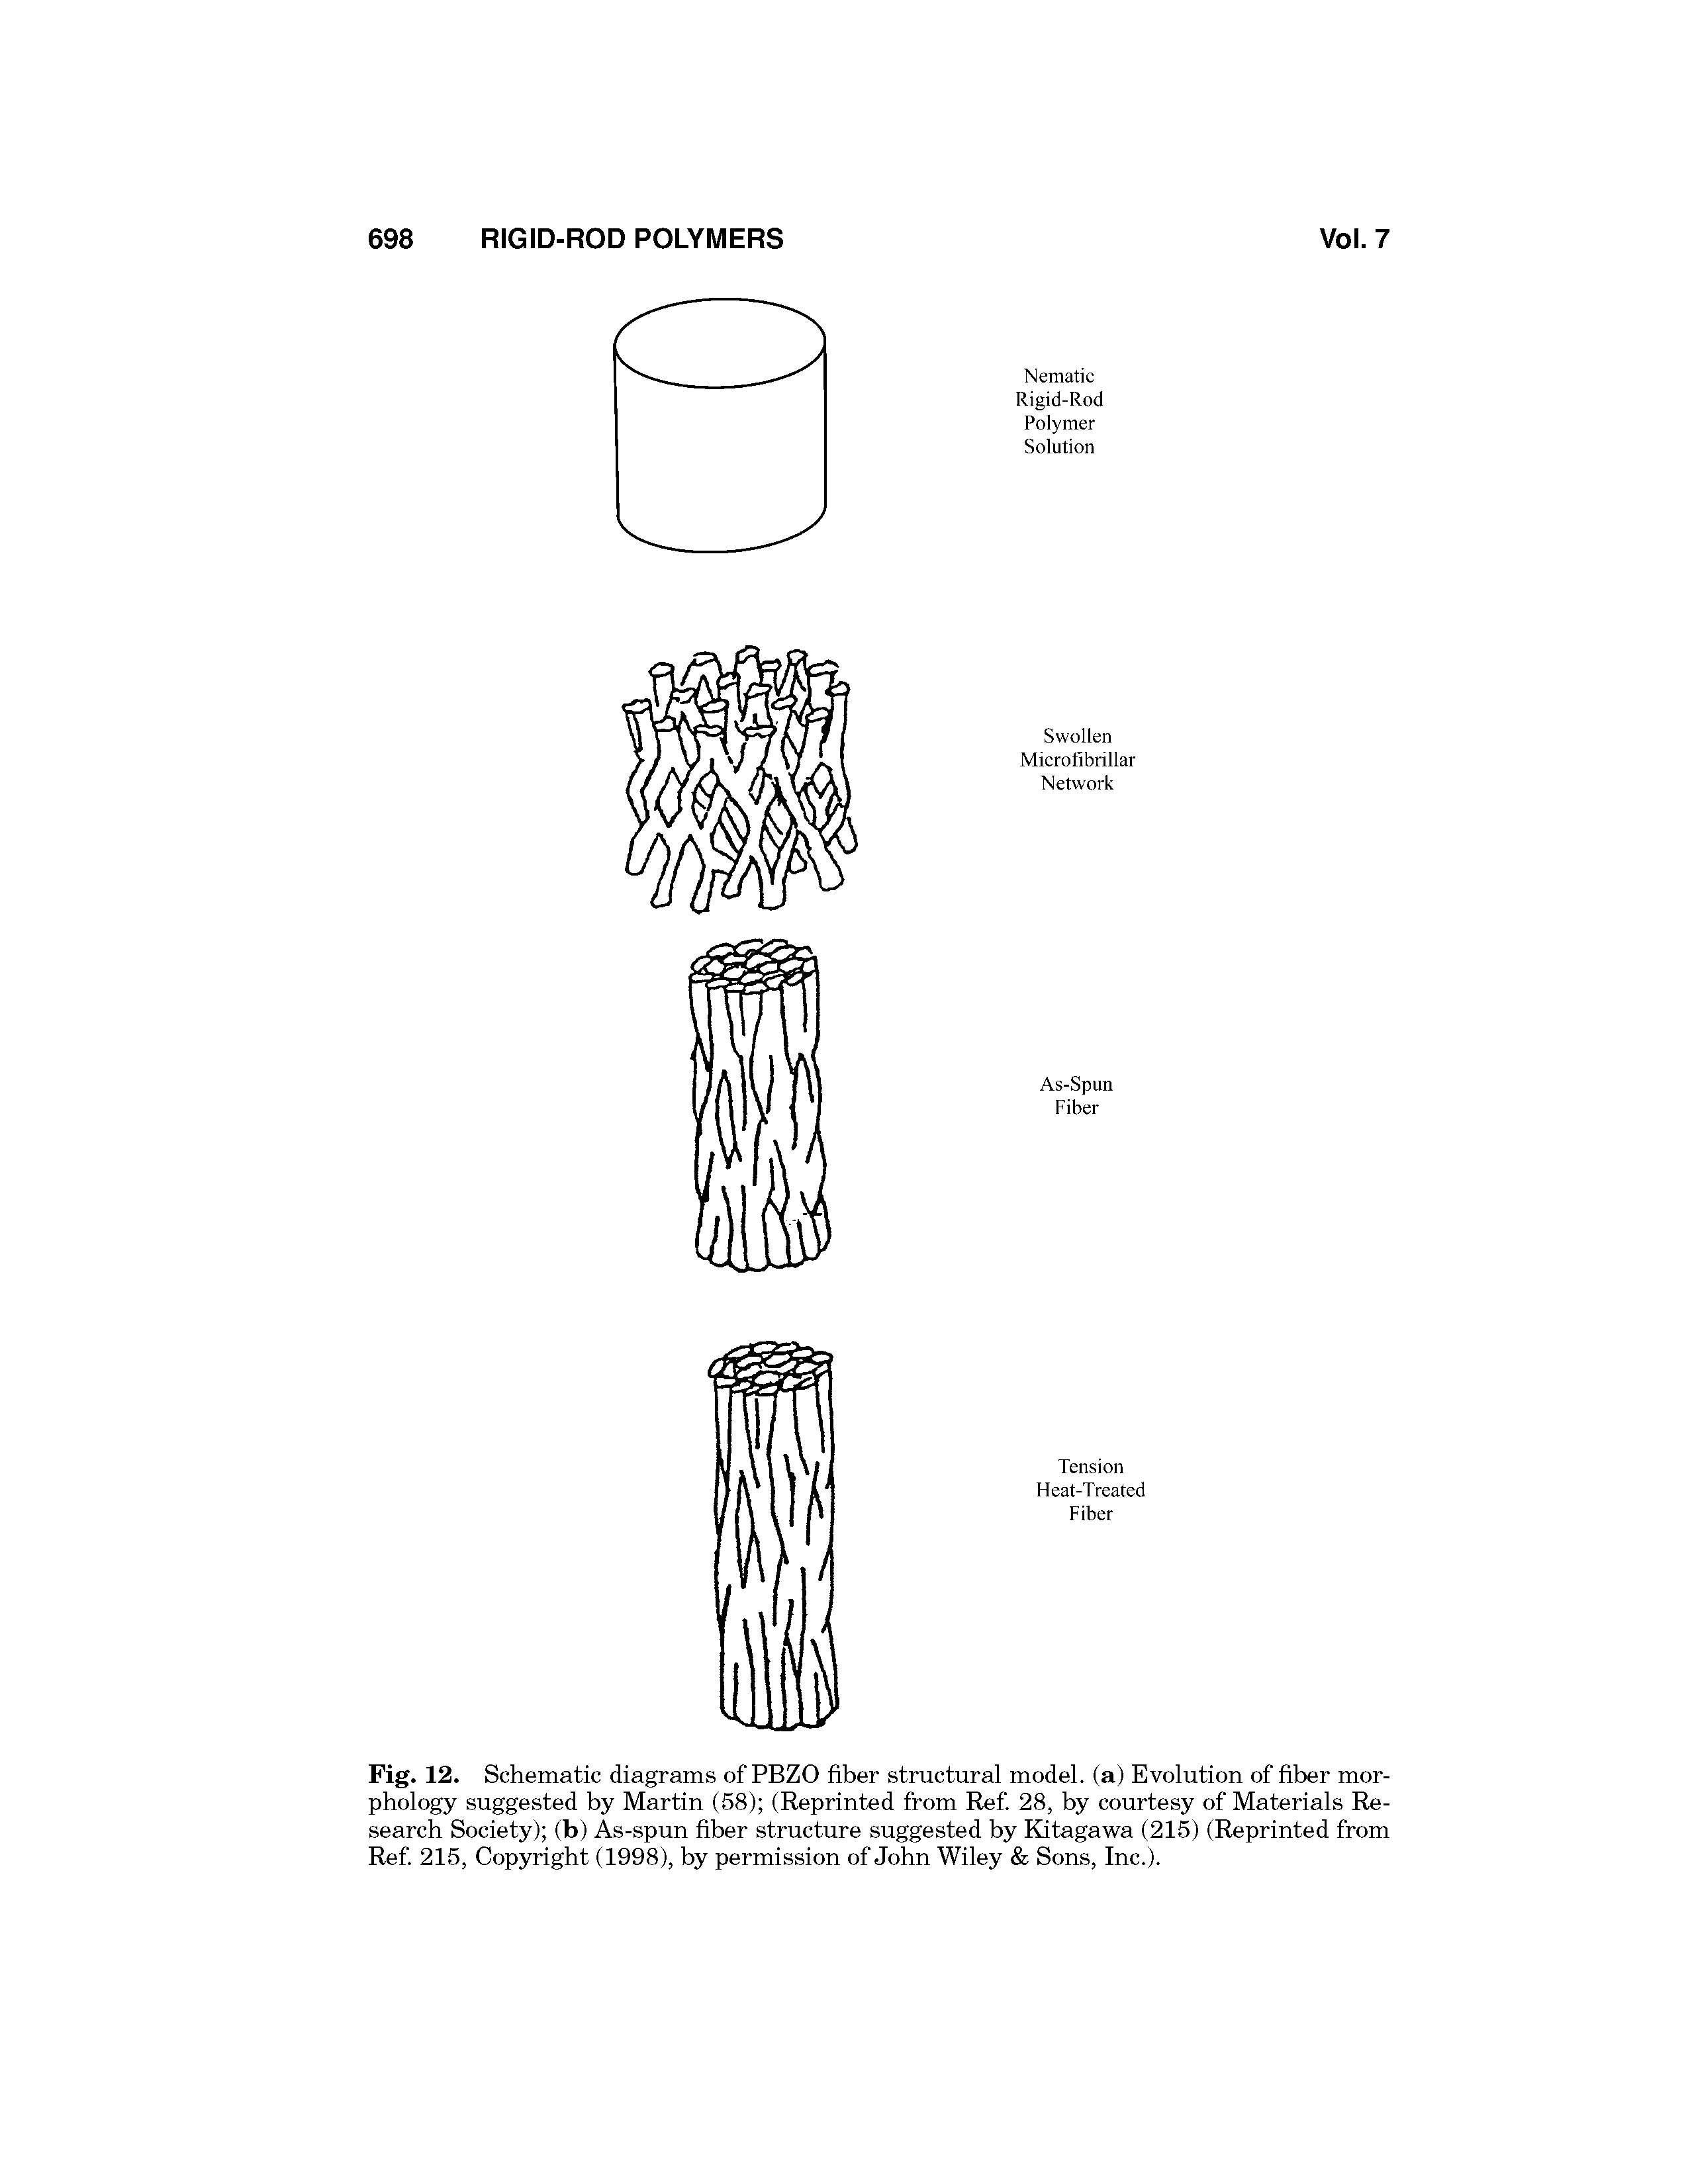 Fig. 12. Schematic diagrams of PBZO fiber structural model, (a) Evolution of fiber morphology suggested by Martin (58) (Reprinted from Ref 28, by courtesy of Materials Research Society) (b) As-spun fiber structure suggested by Kitagawa (215) (Reprinted from Ref 215, Copyright (1998), by permission of John Wiley Sons, Inc.).